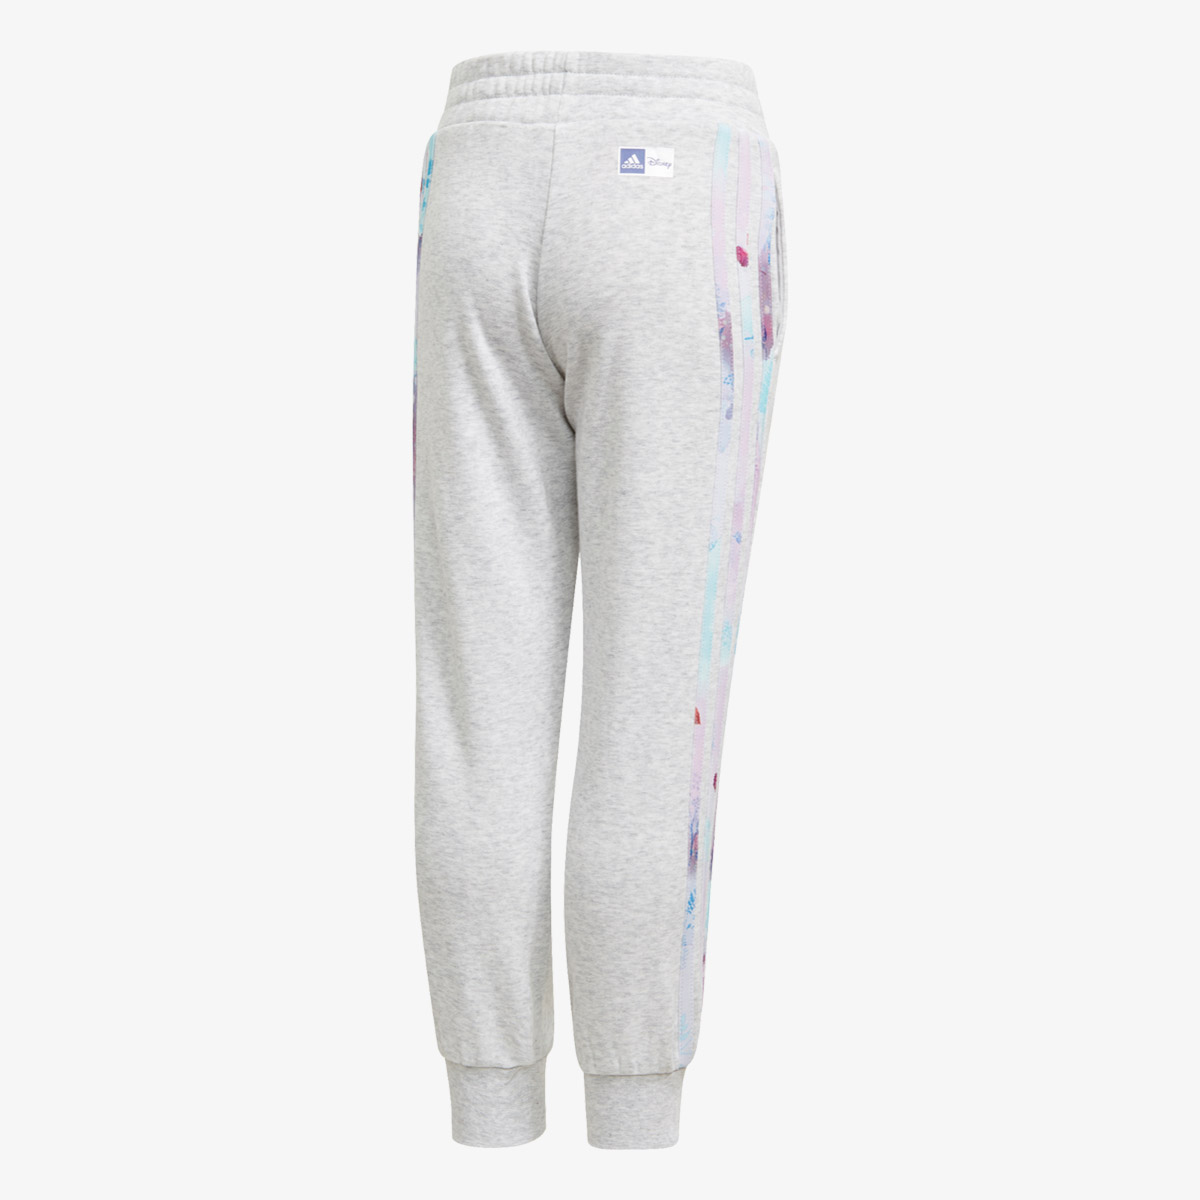 adidas LG DY Fro Pant 